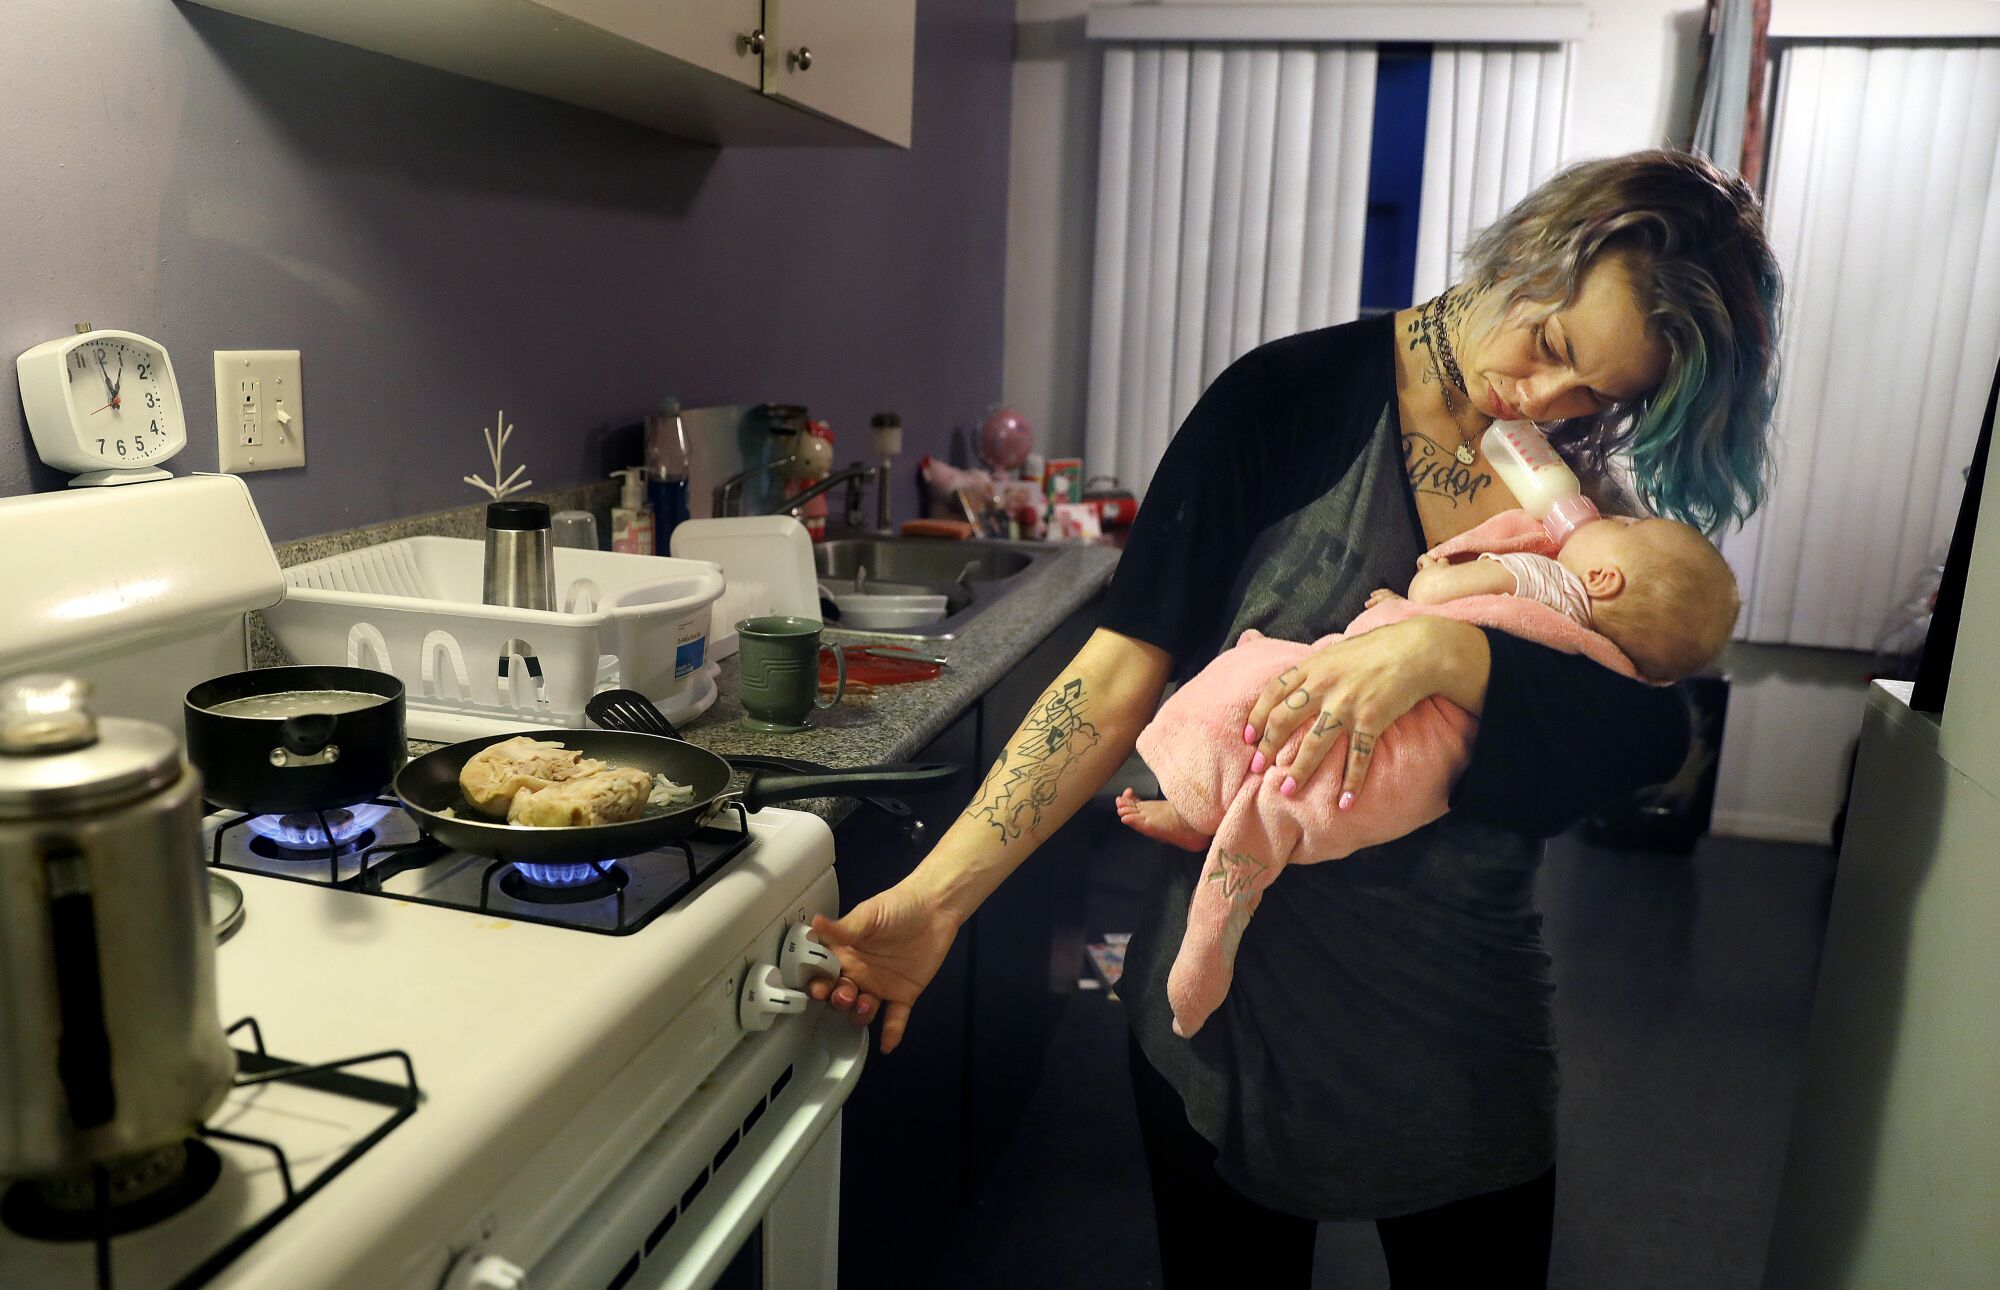 A woman carrying a baby holds a baby bottle against her chin while turning the nob on a stove to cook dinner